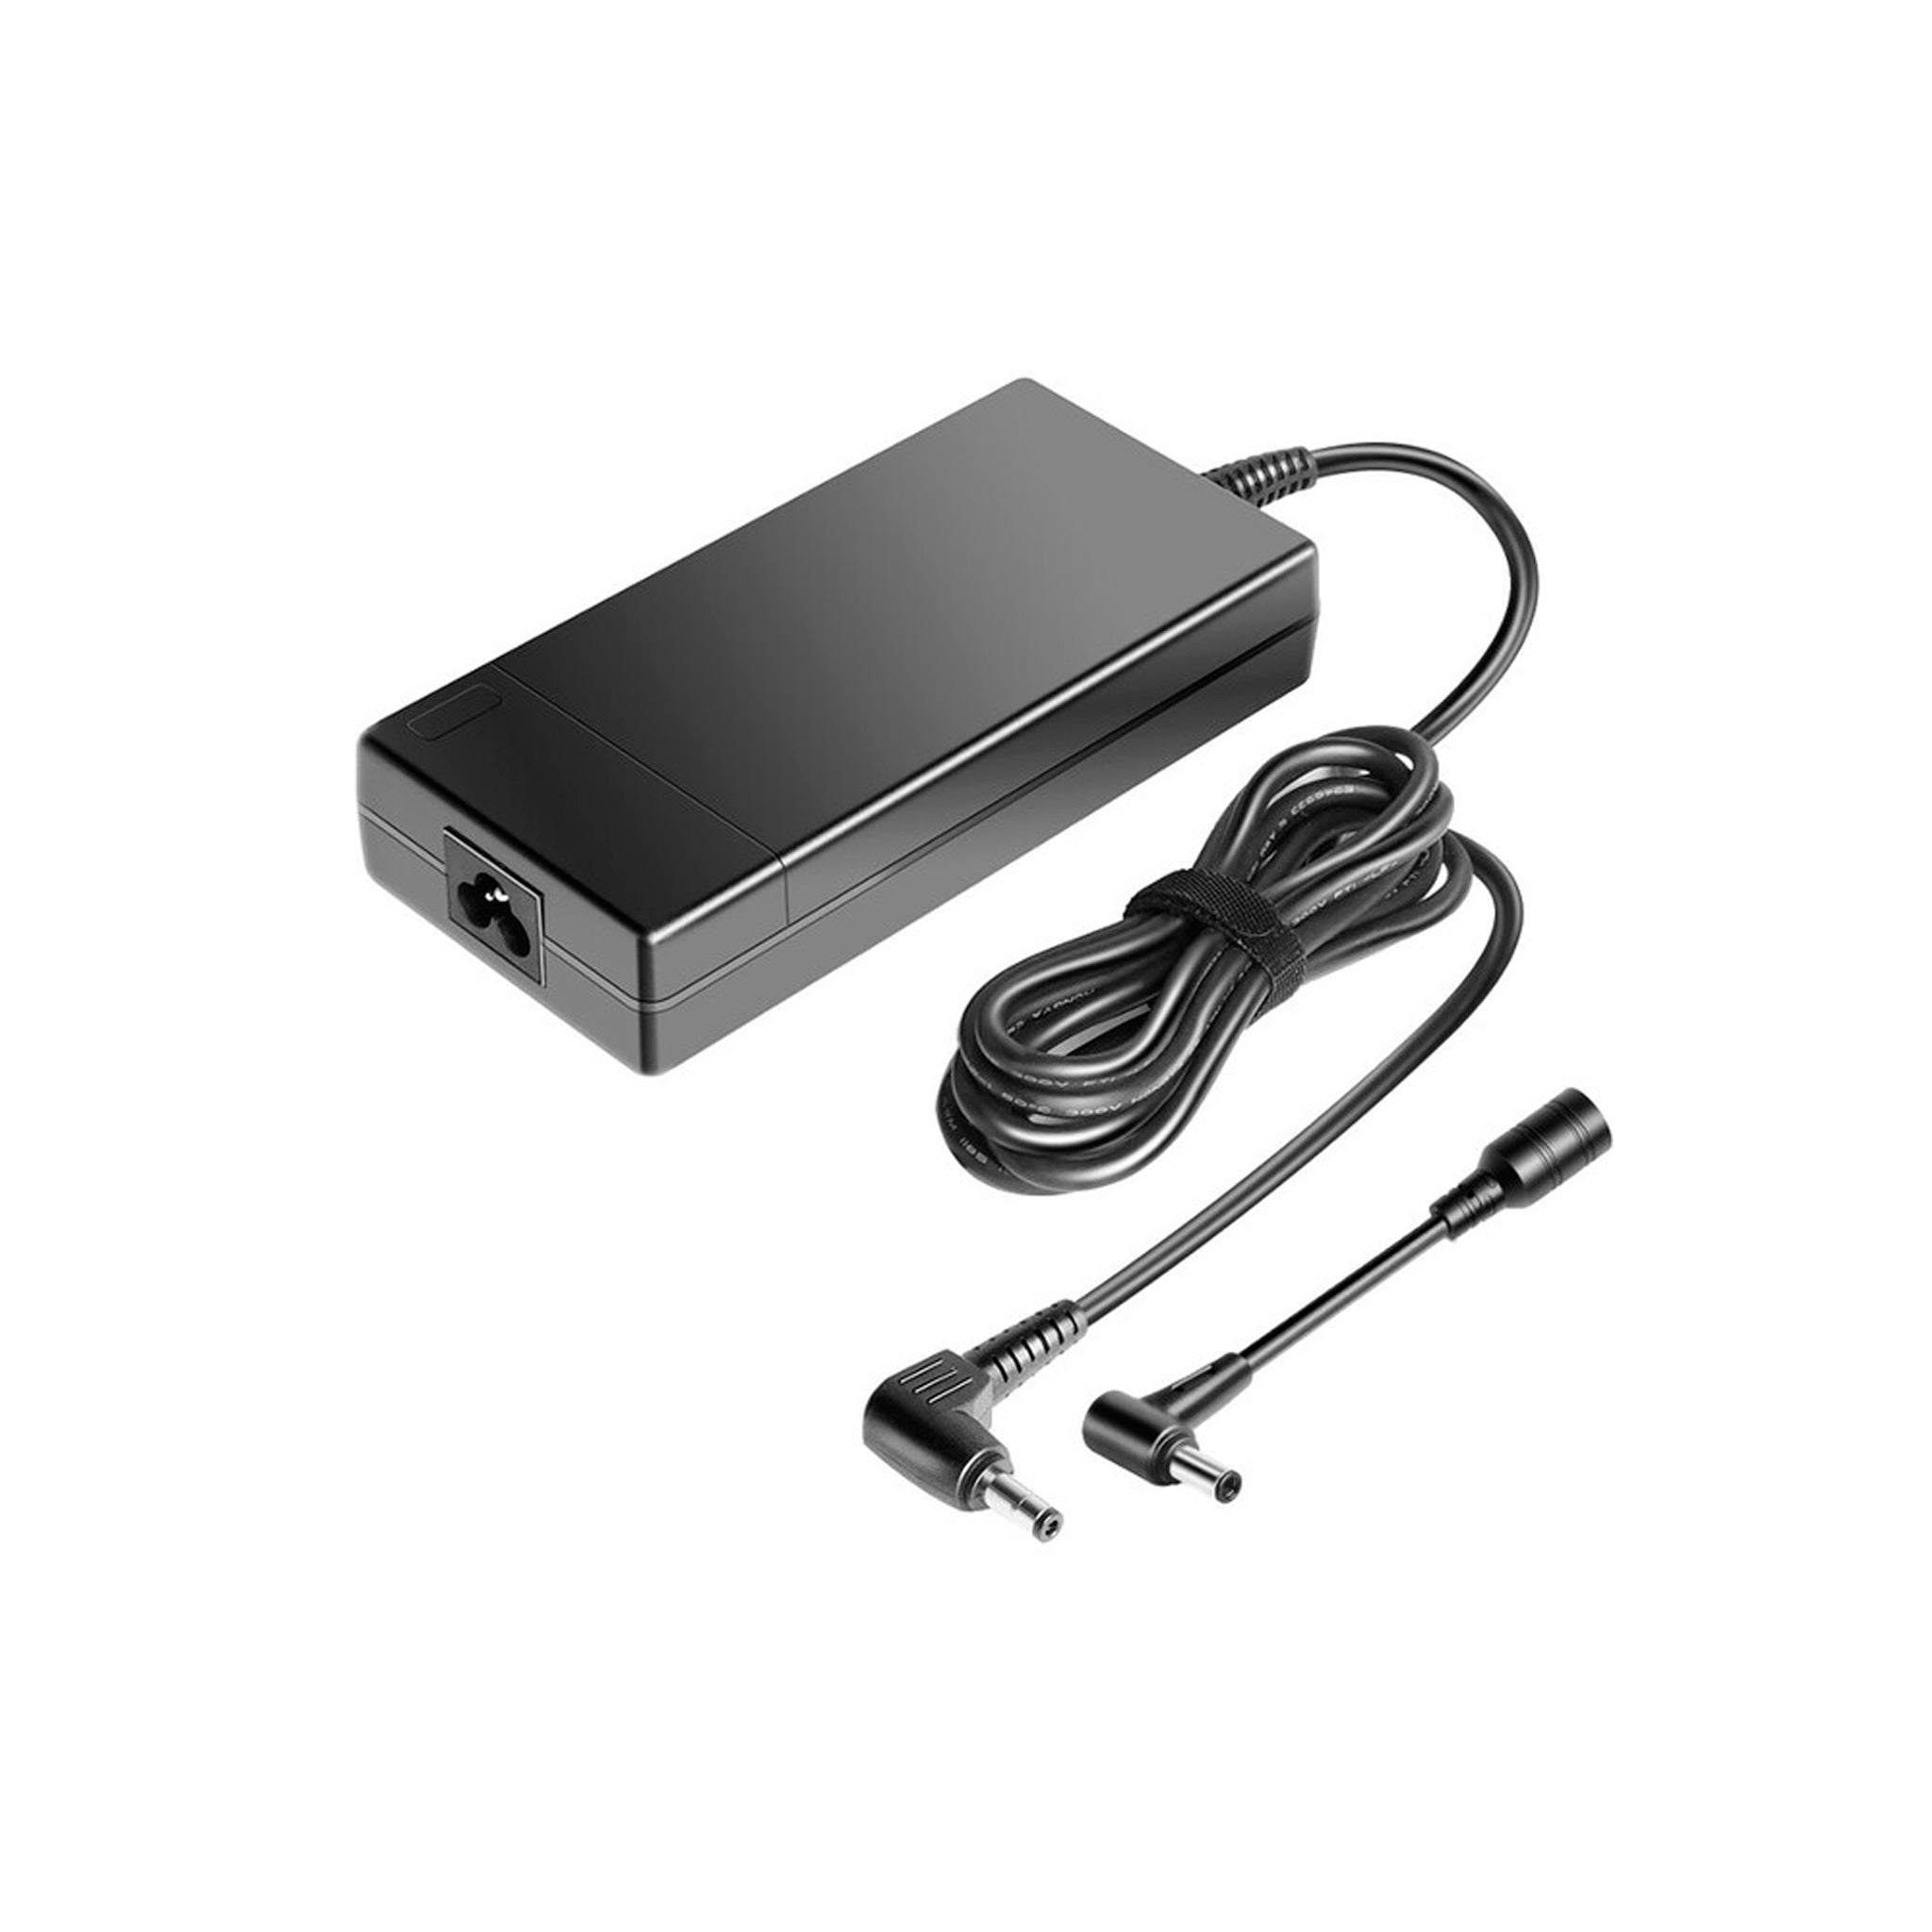 Bti - Ac Power Adapter 180w For Most Asus Laptops - Black